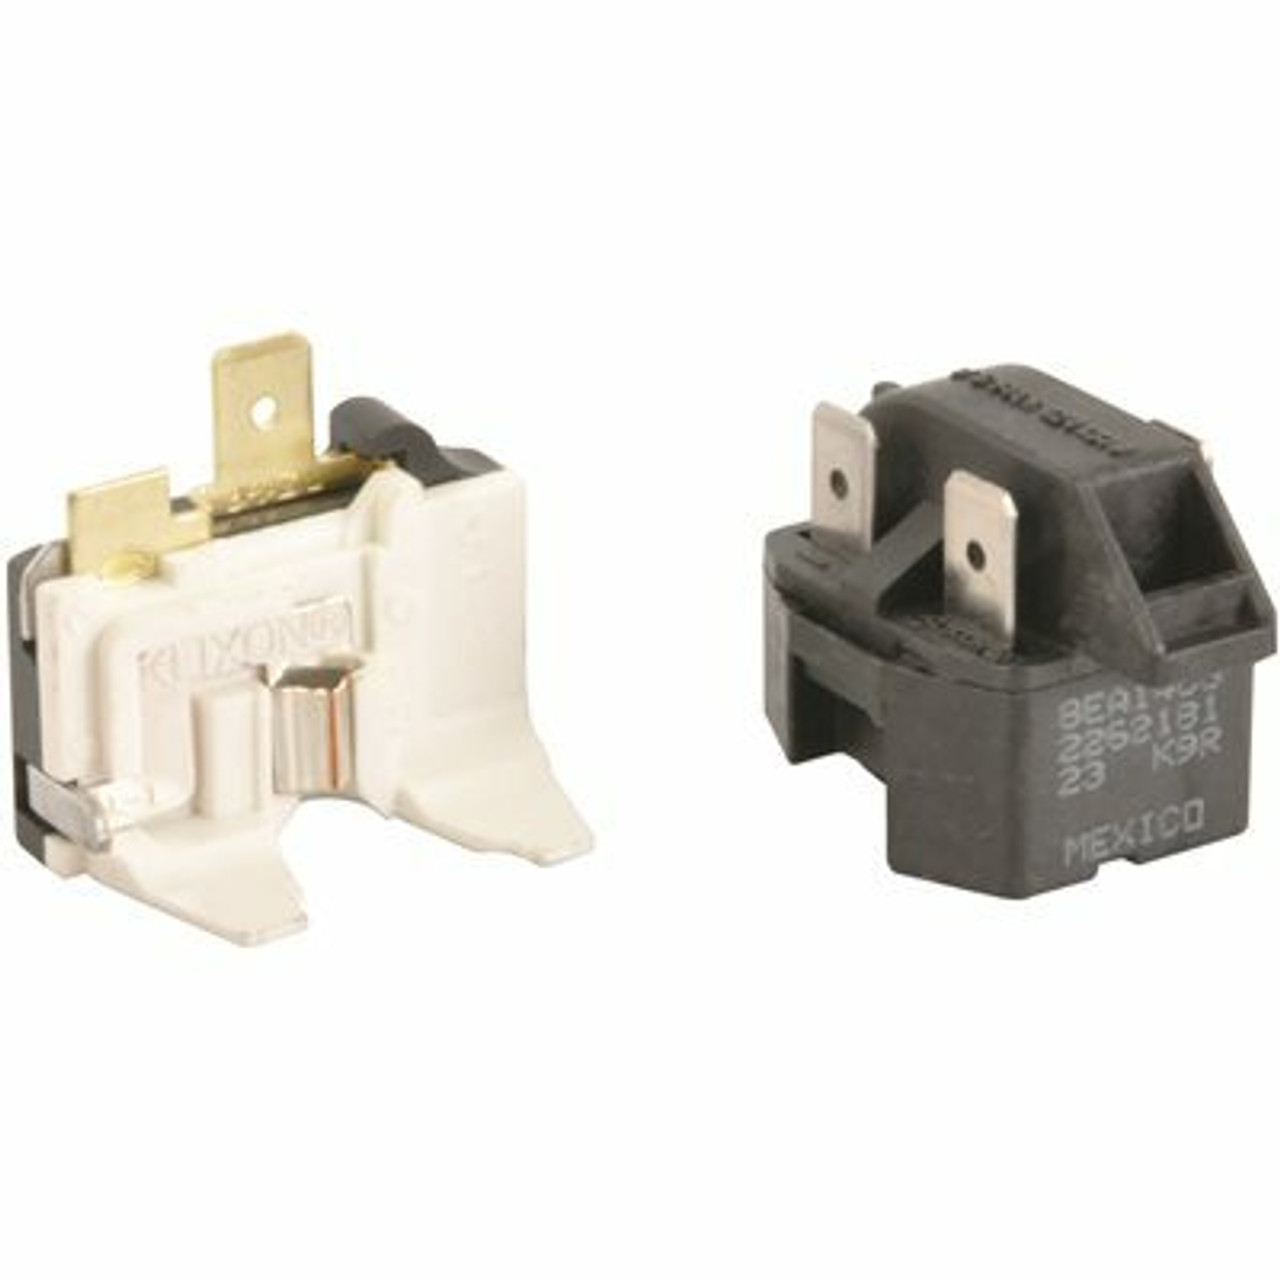 Supco Refrigerator 3 Wire Relay And Overload